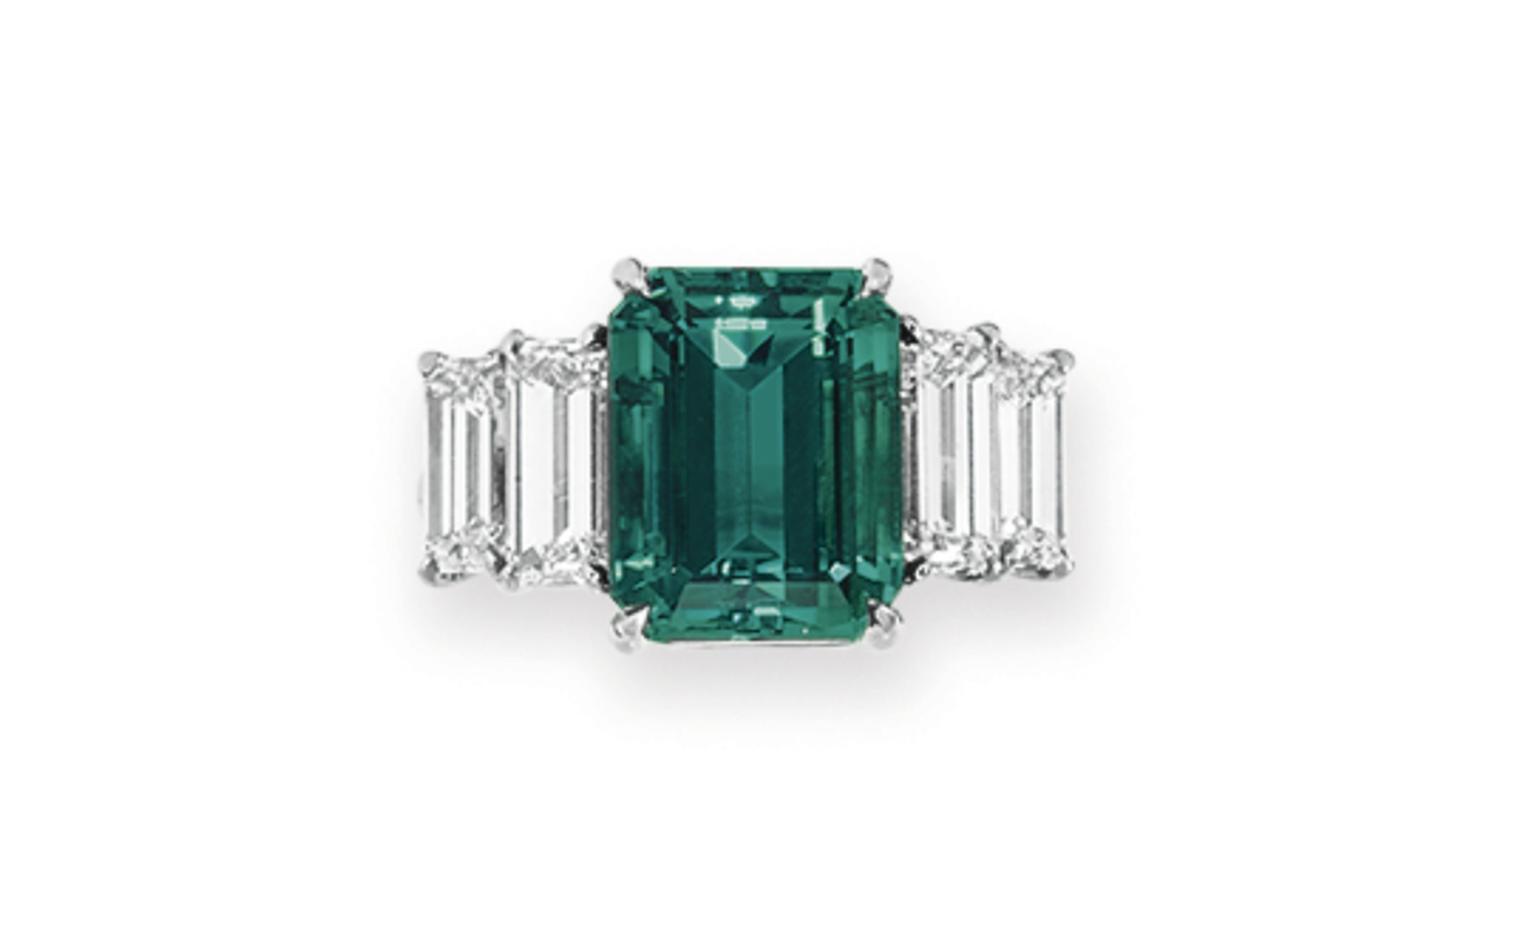 Lot 95. A green tourmaline and diamond ring. Estimate 2,000 - 3,000 U.S. dollars. SOLD FOR $6,250